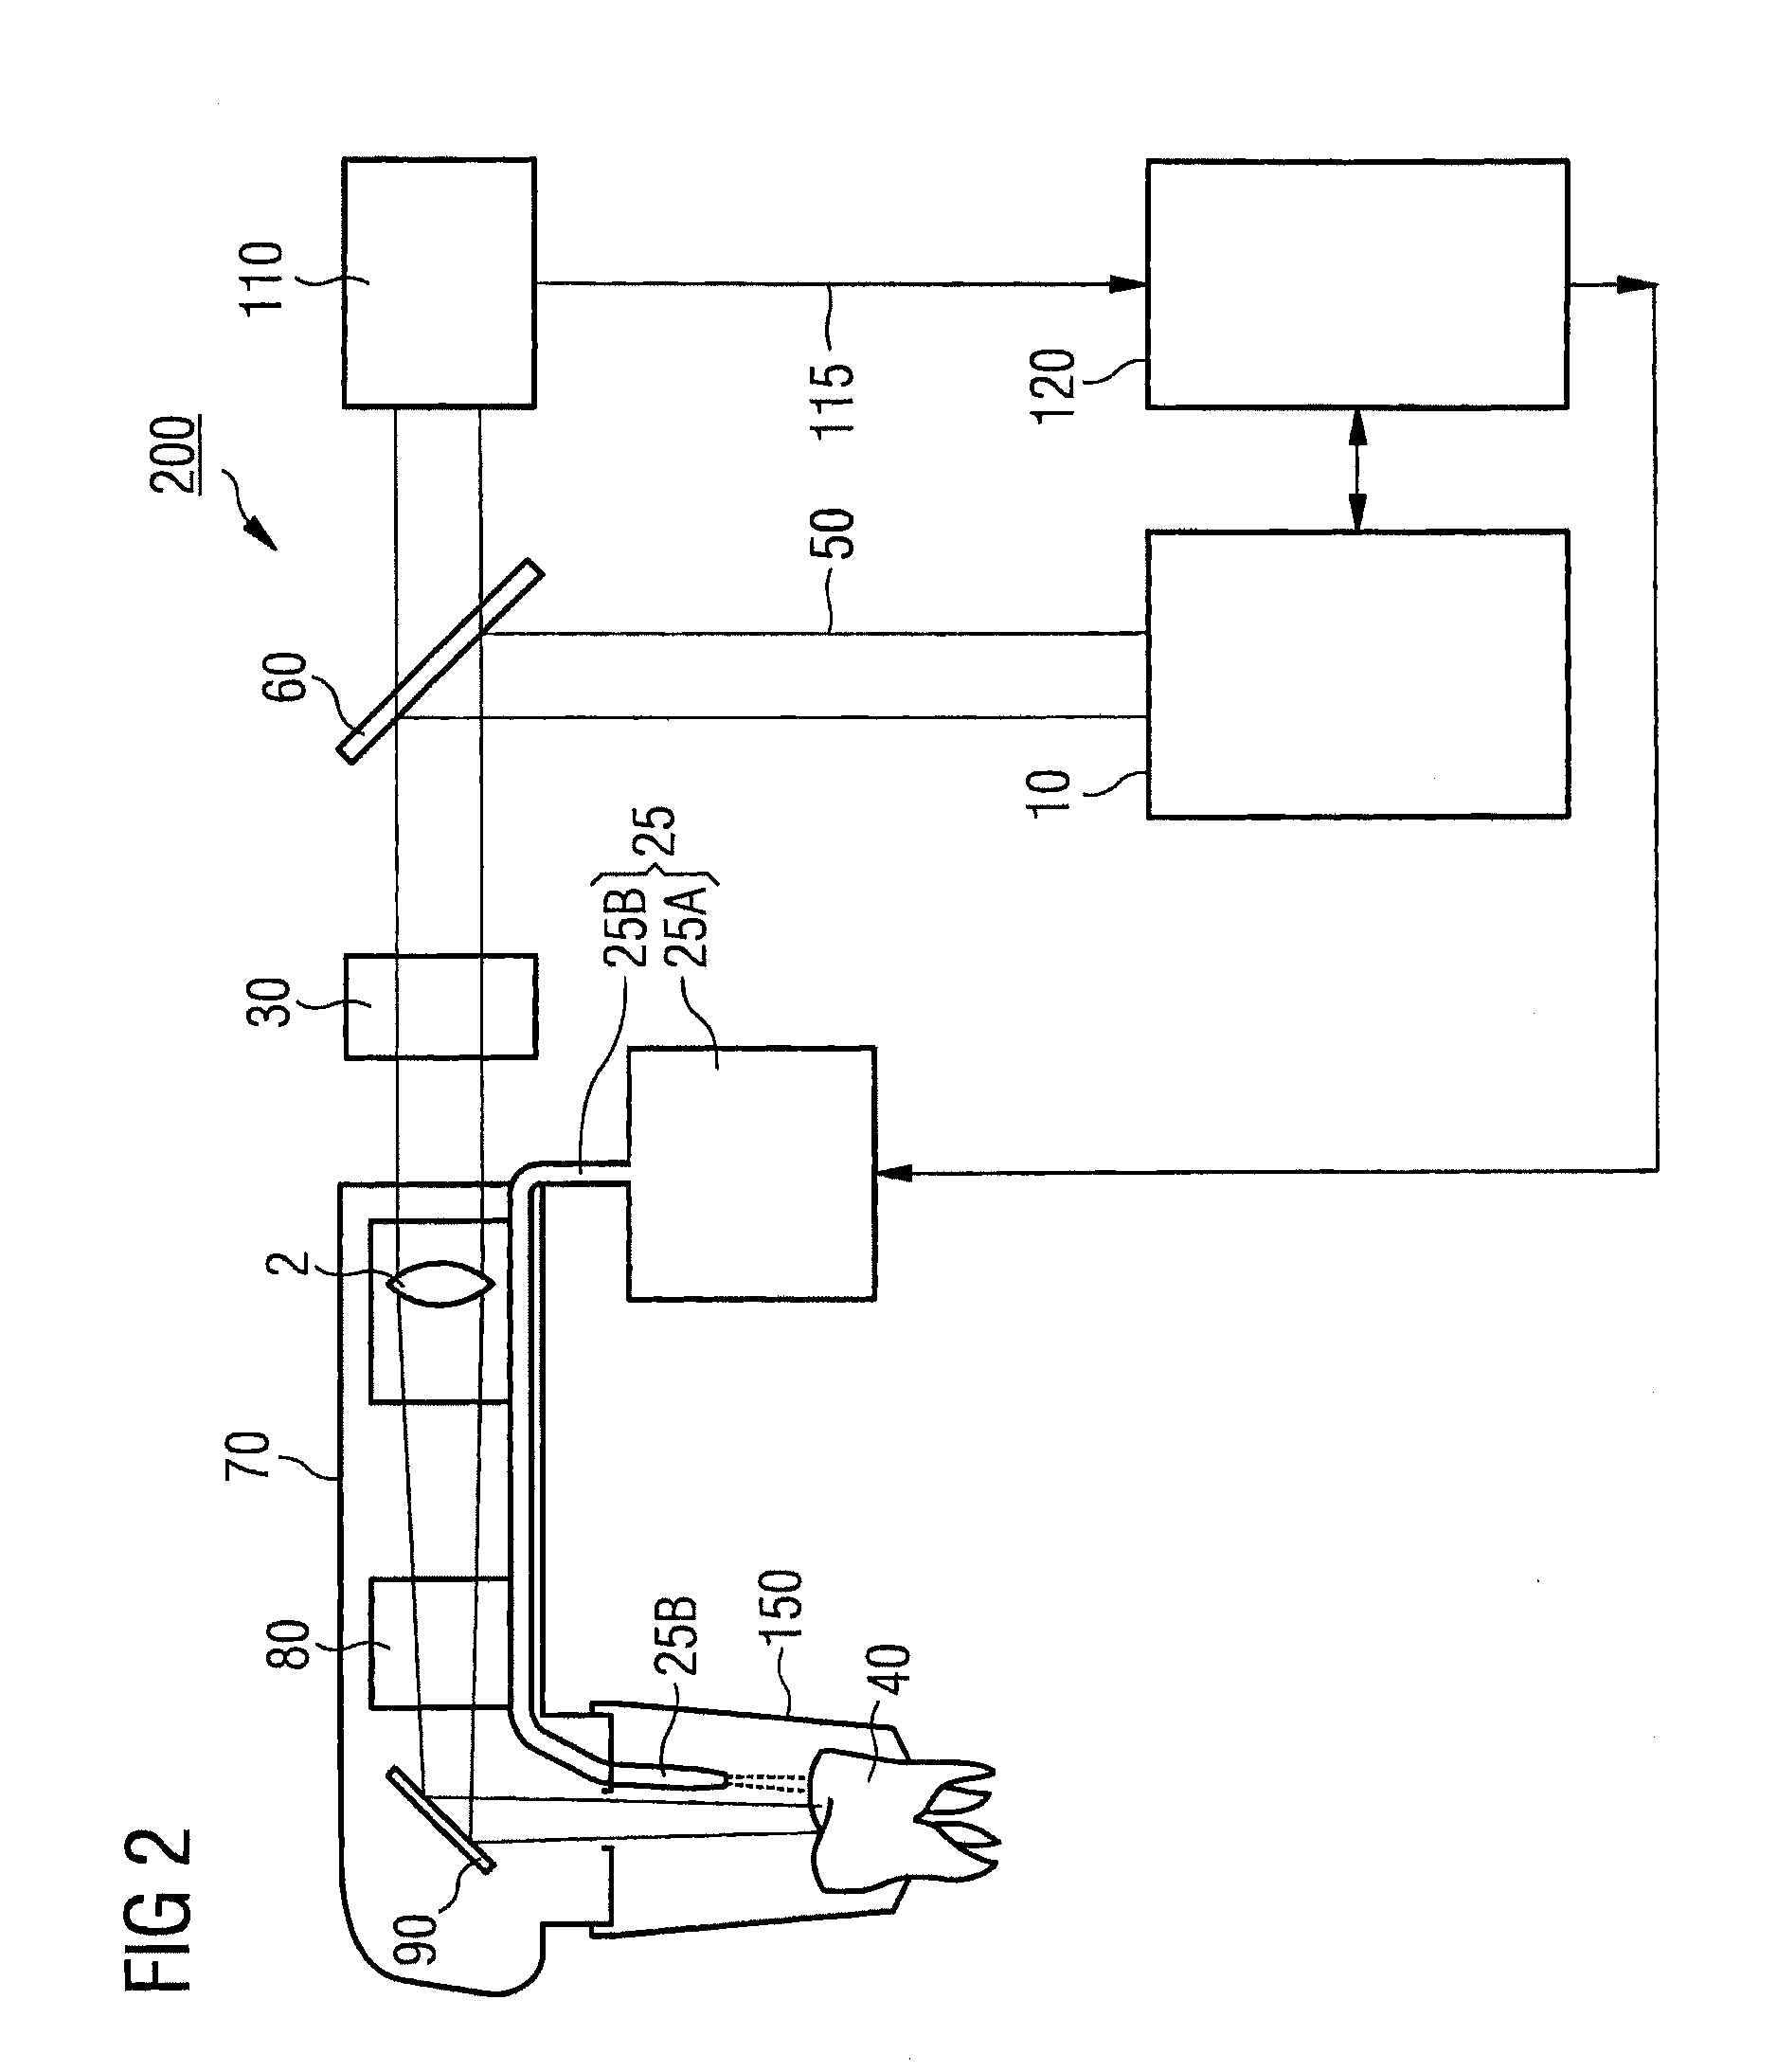 Device and method for lasering biological tissue